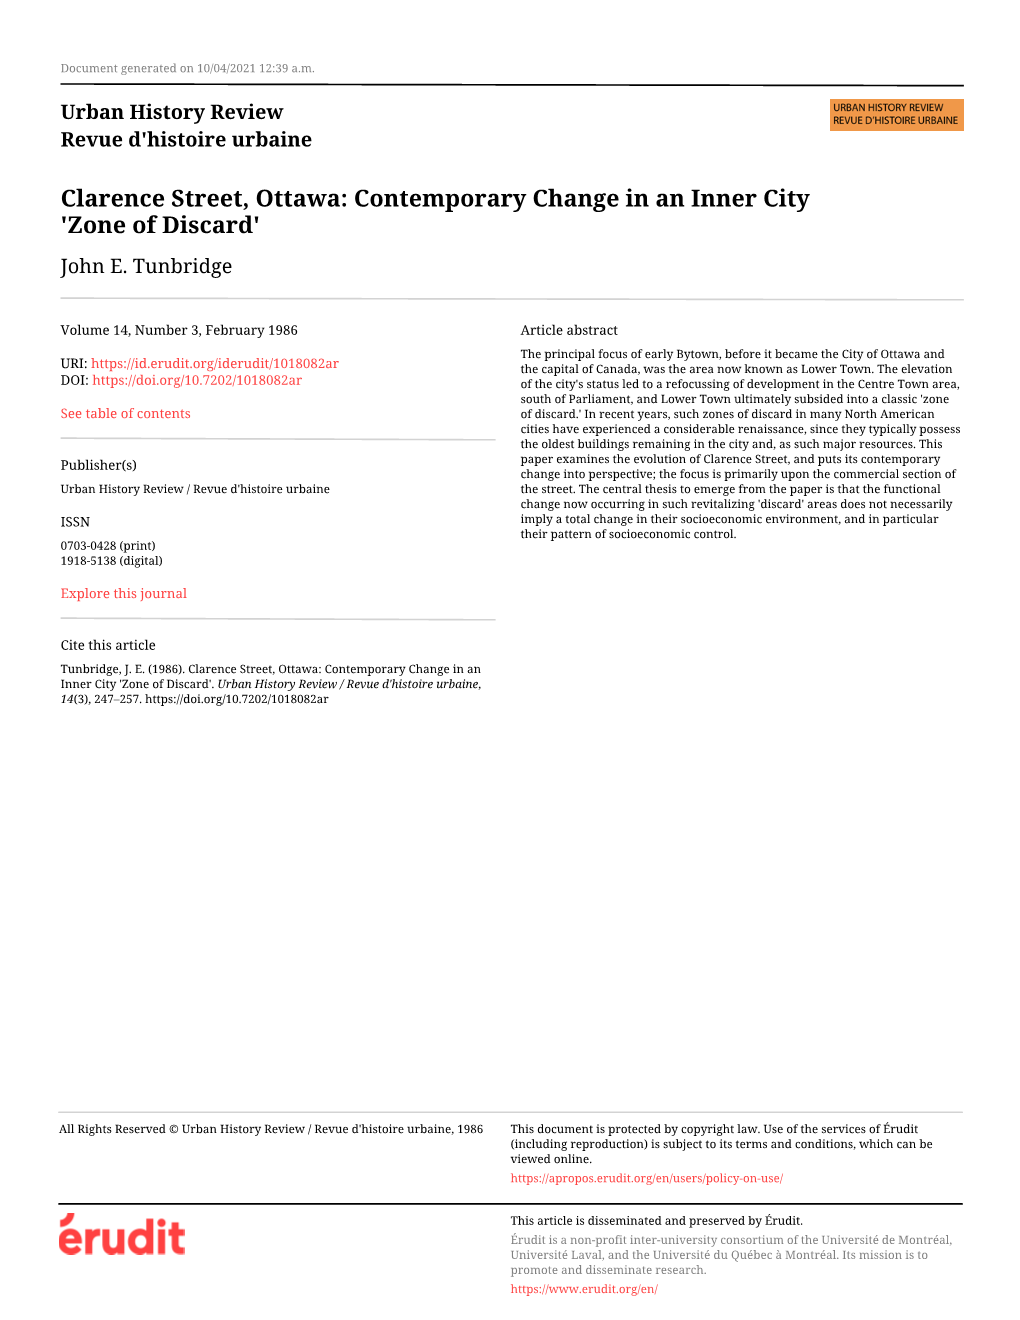 Clarence Street, Ottawa: Contemporary Change in an Inner City 'Zone of Discard' John E